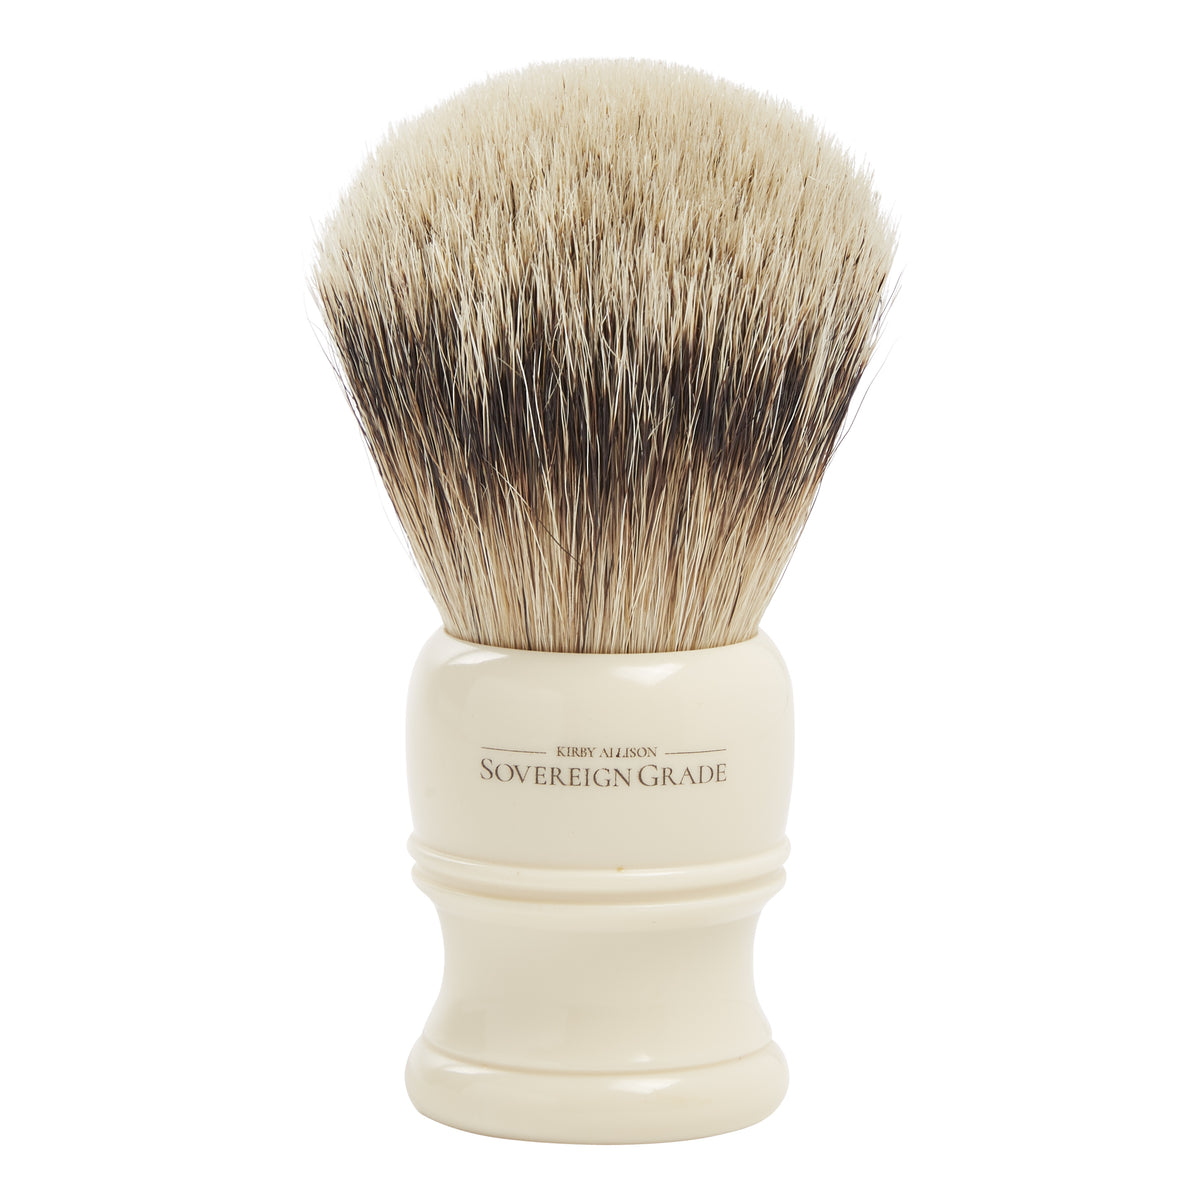 A Sovereign Grade Silvertip Badger Brush by KirbyAllison.com on a white background.